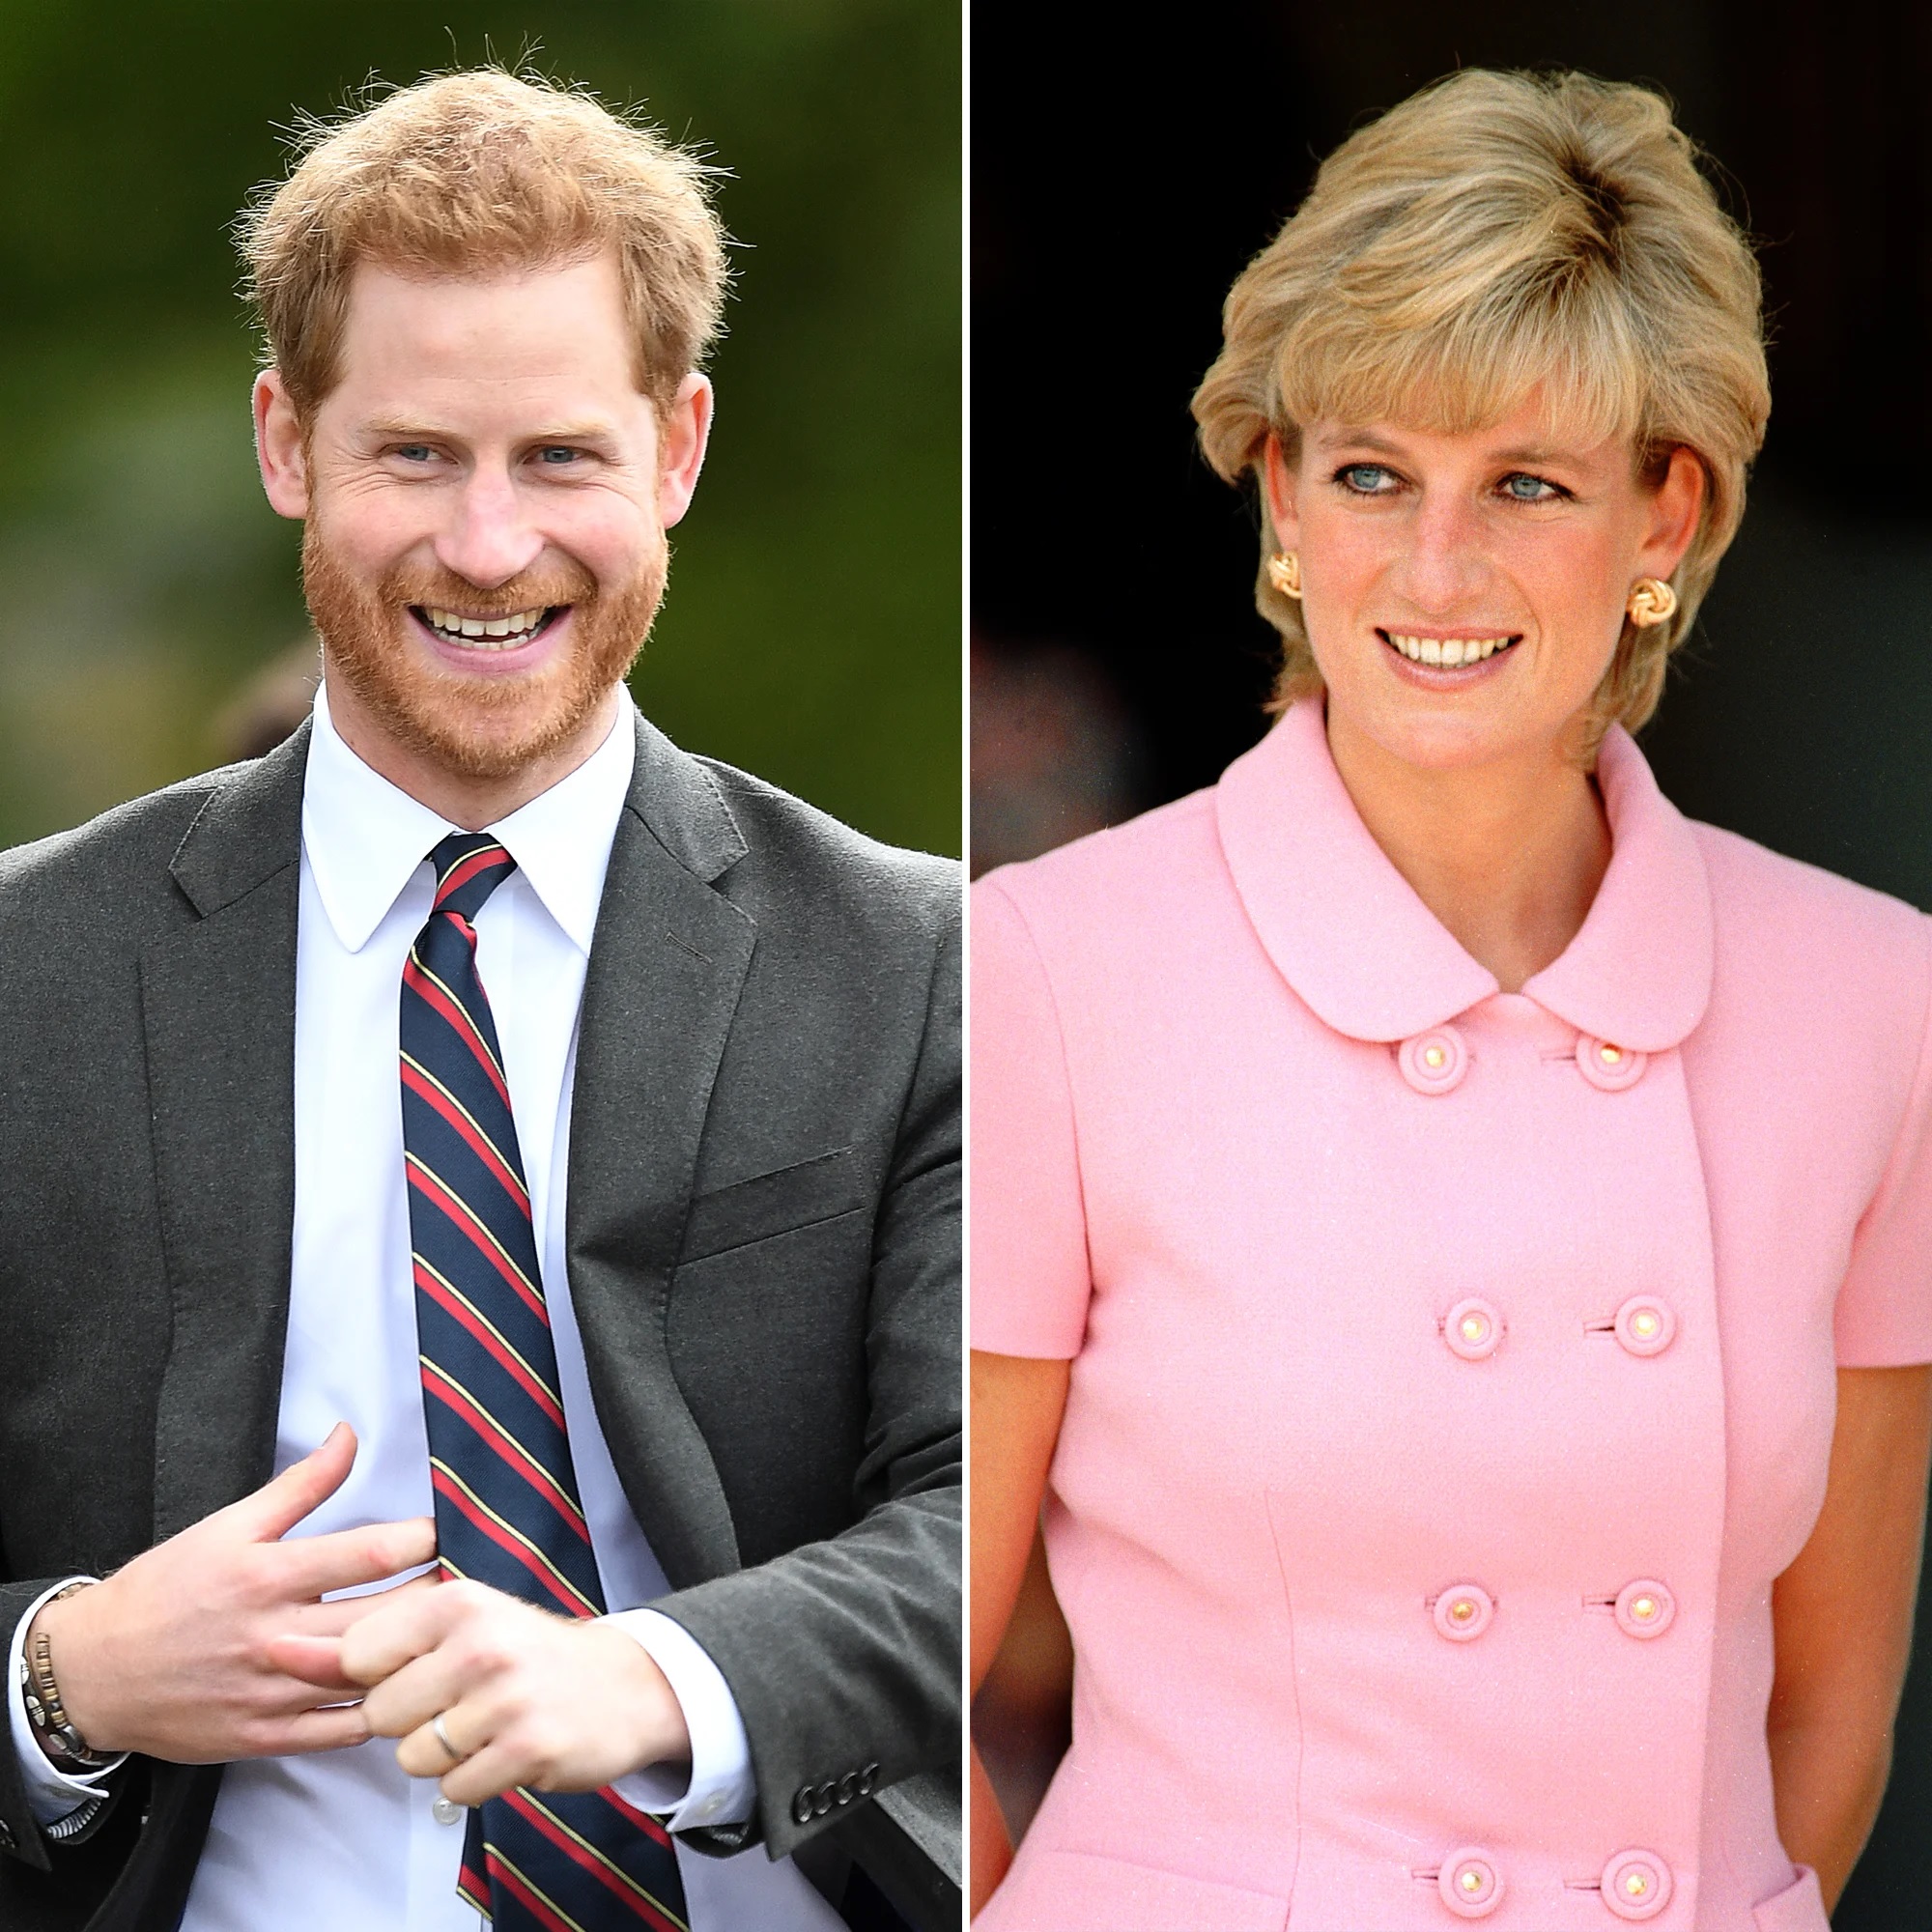 Prince Harry's touching tribute to late Princess Diana and hopes he 'does her proud'